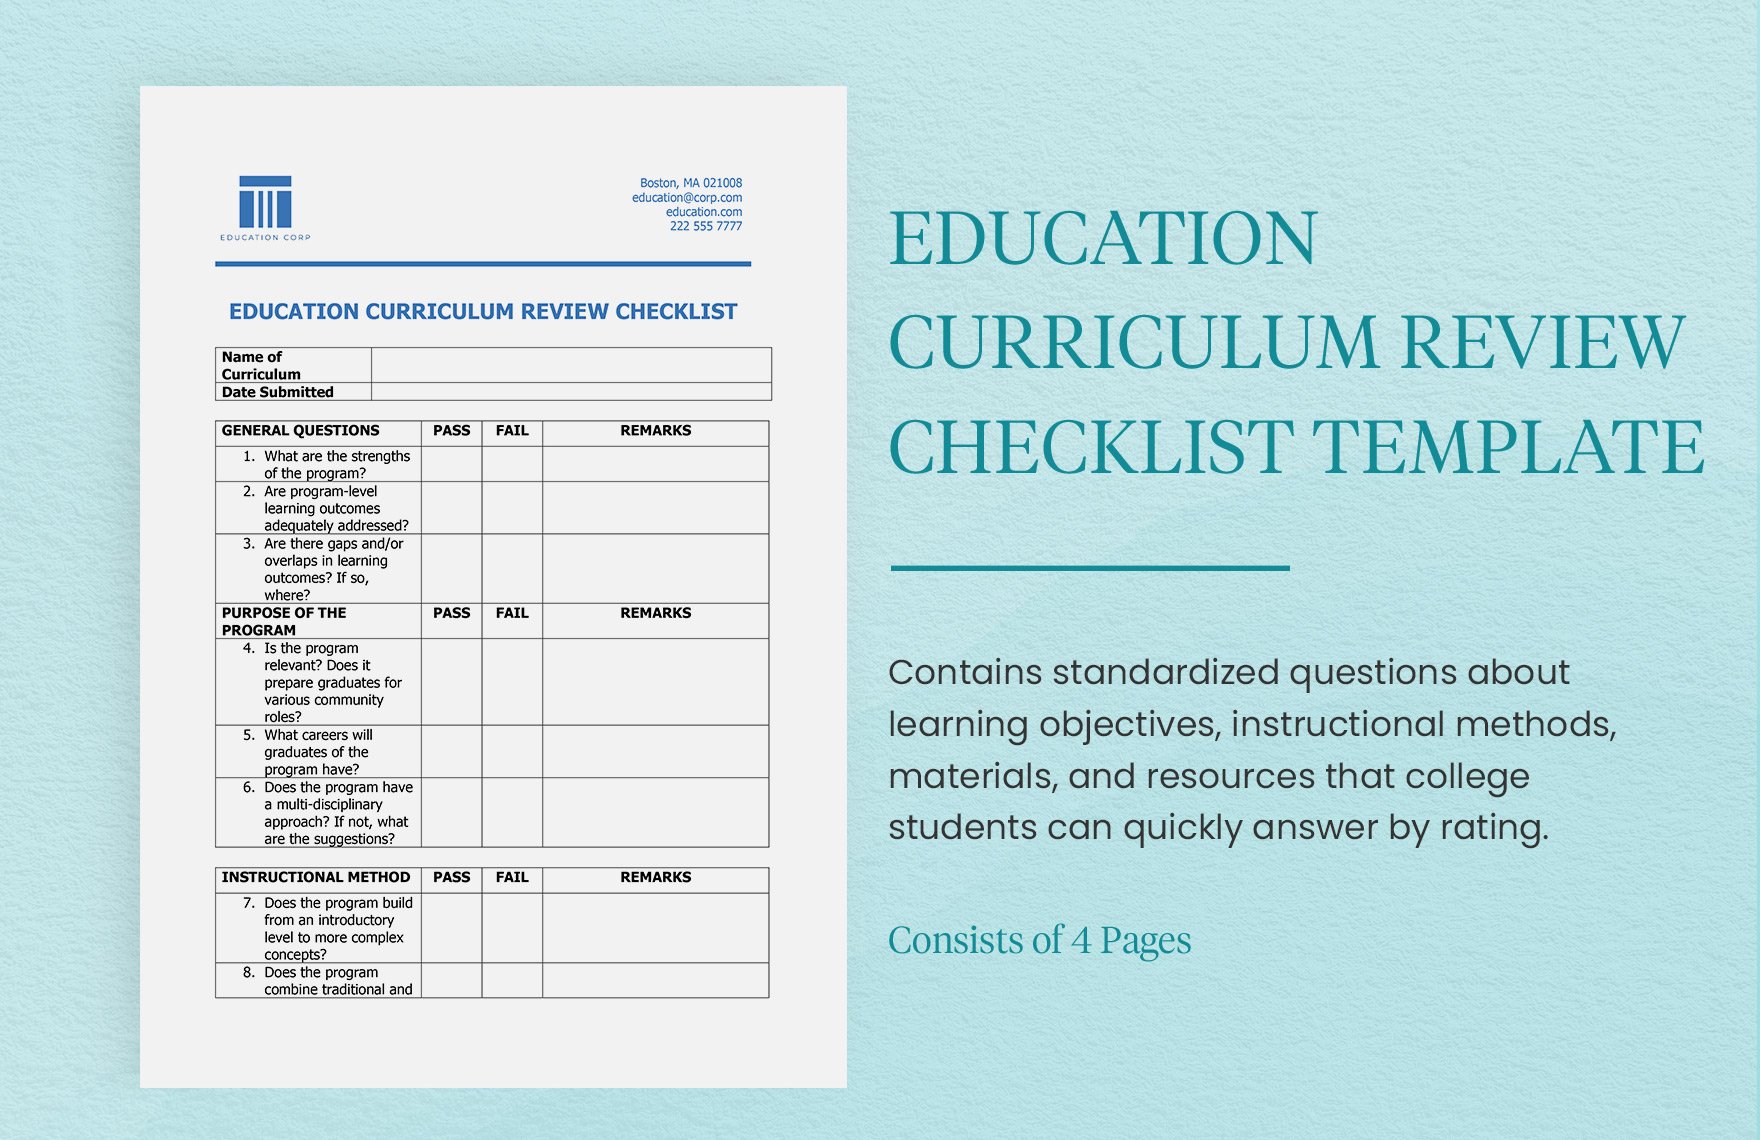 Education Curriculum Review Checklist Template in Word, Google Docs